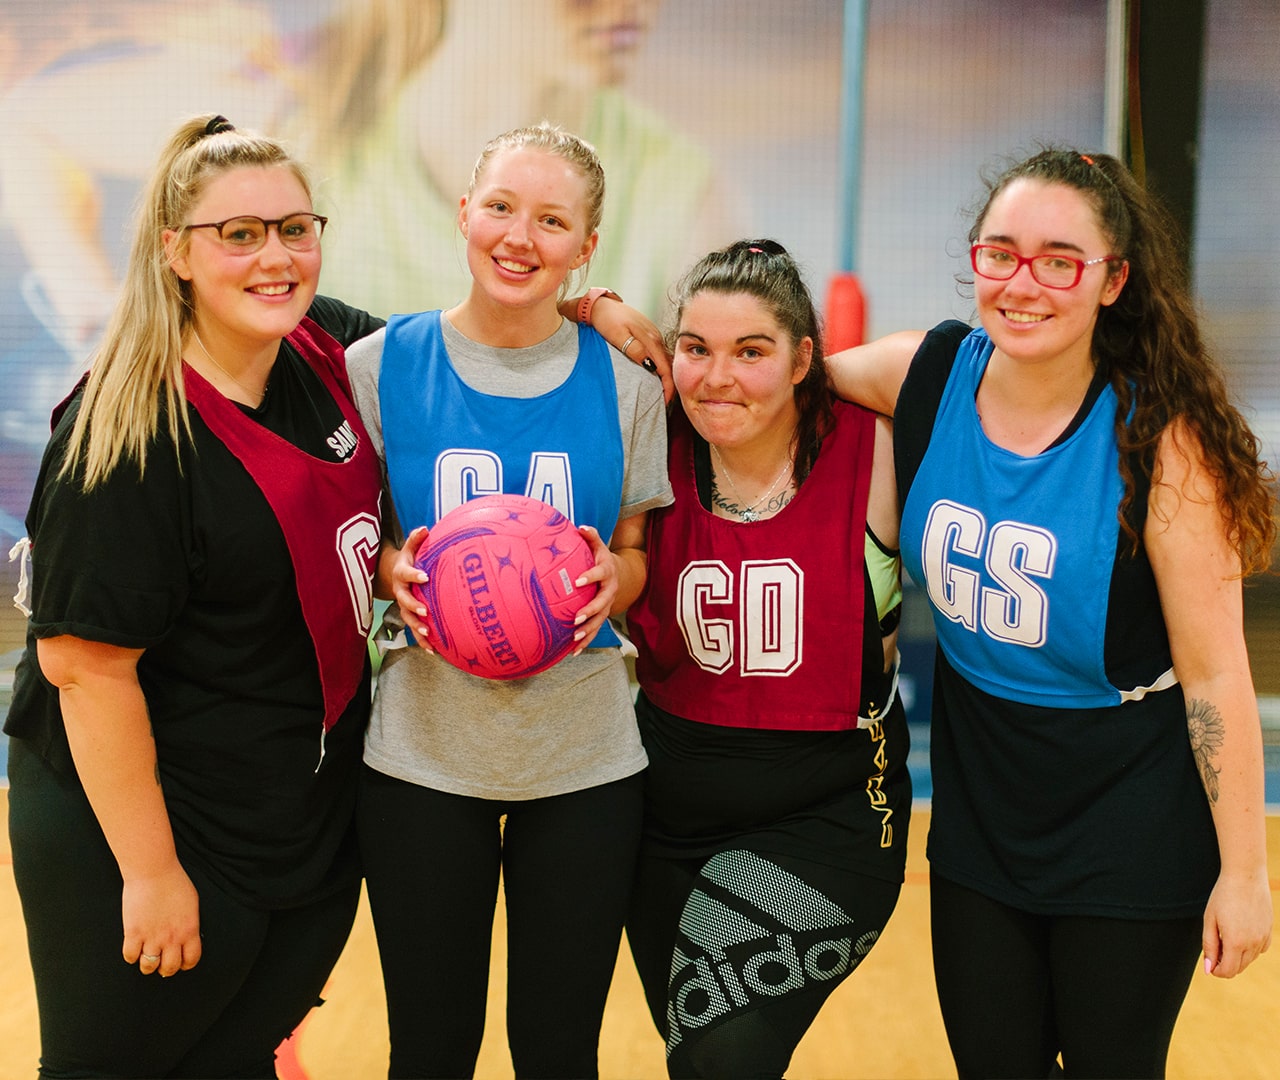 Four adult netballers smiling for the camera